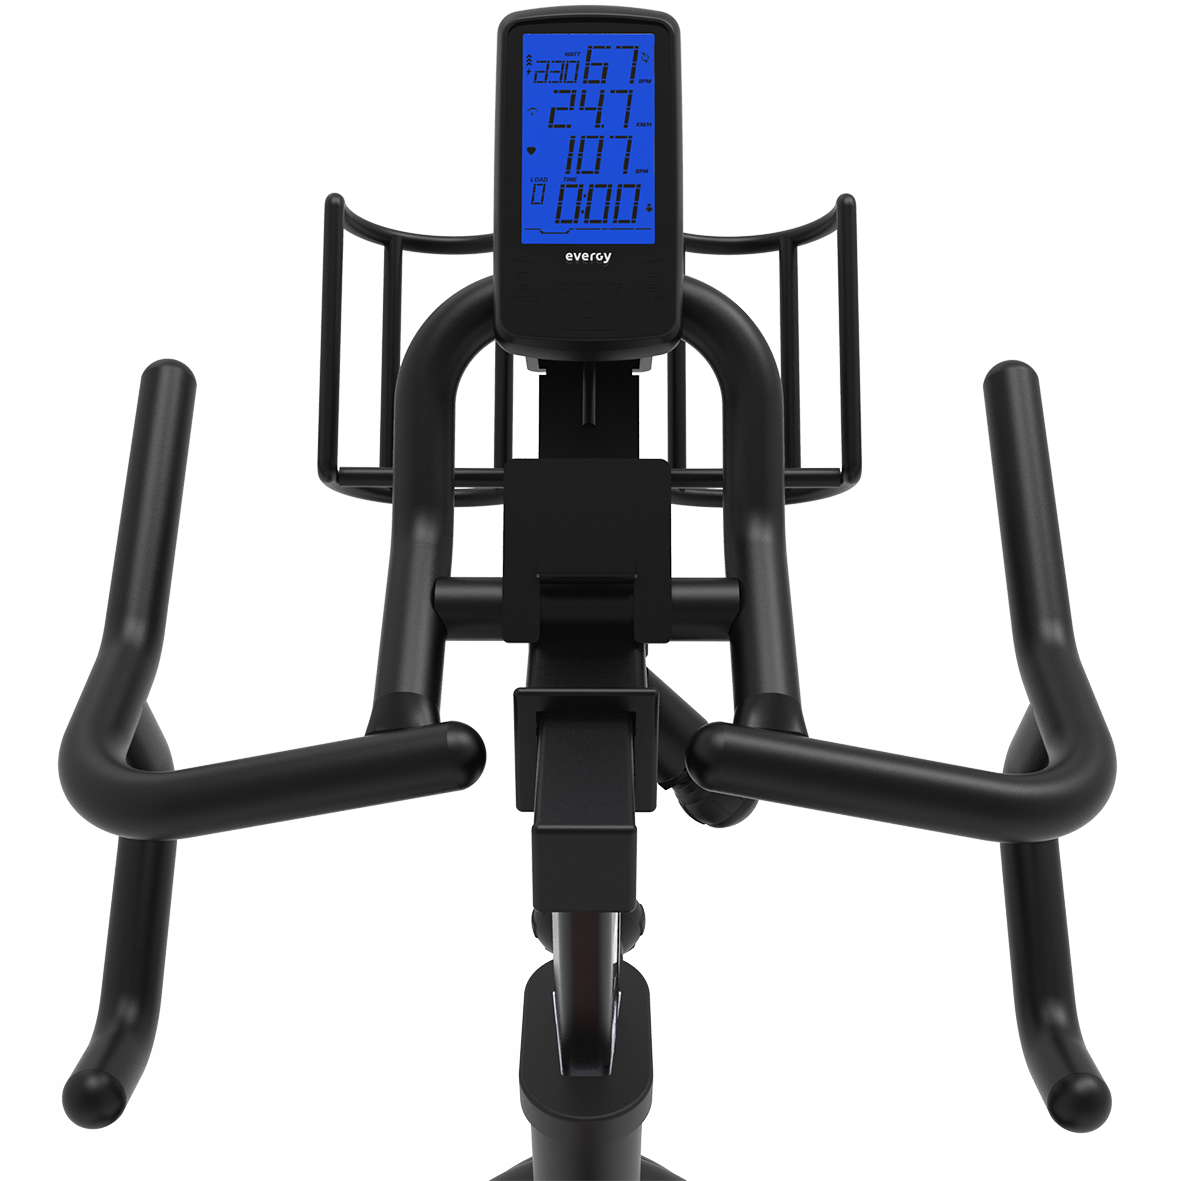 Bicicleta Spinning Indoor Cyclicng Fmc/comp